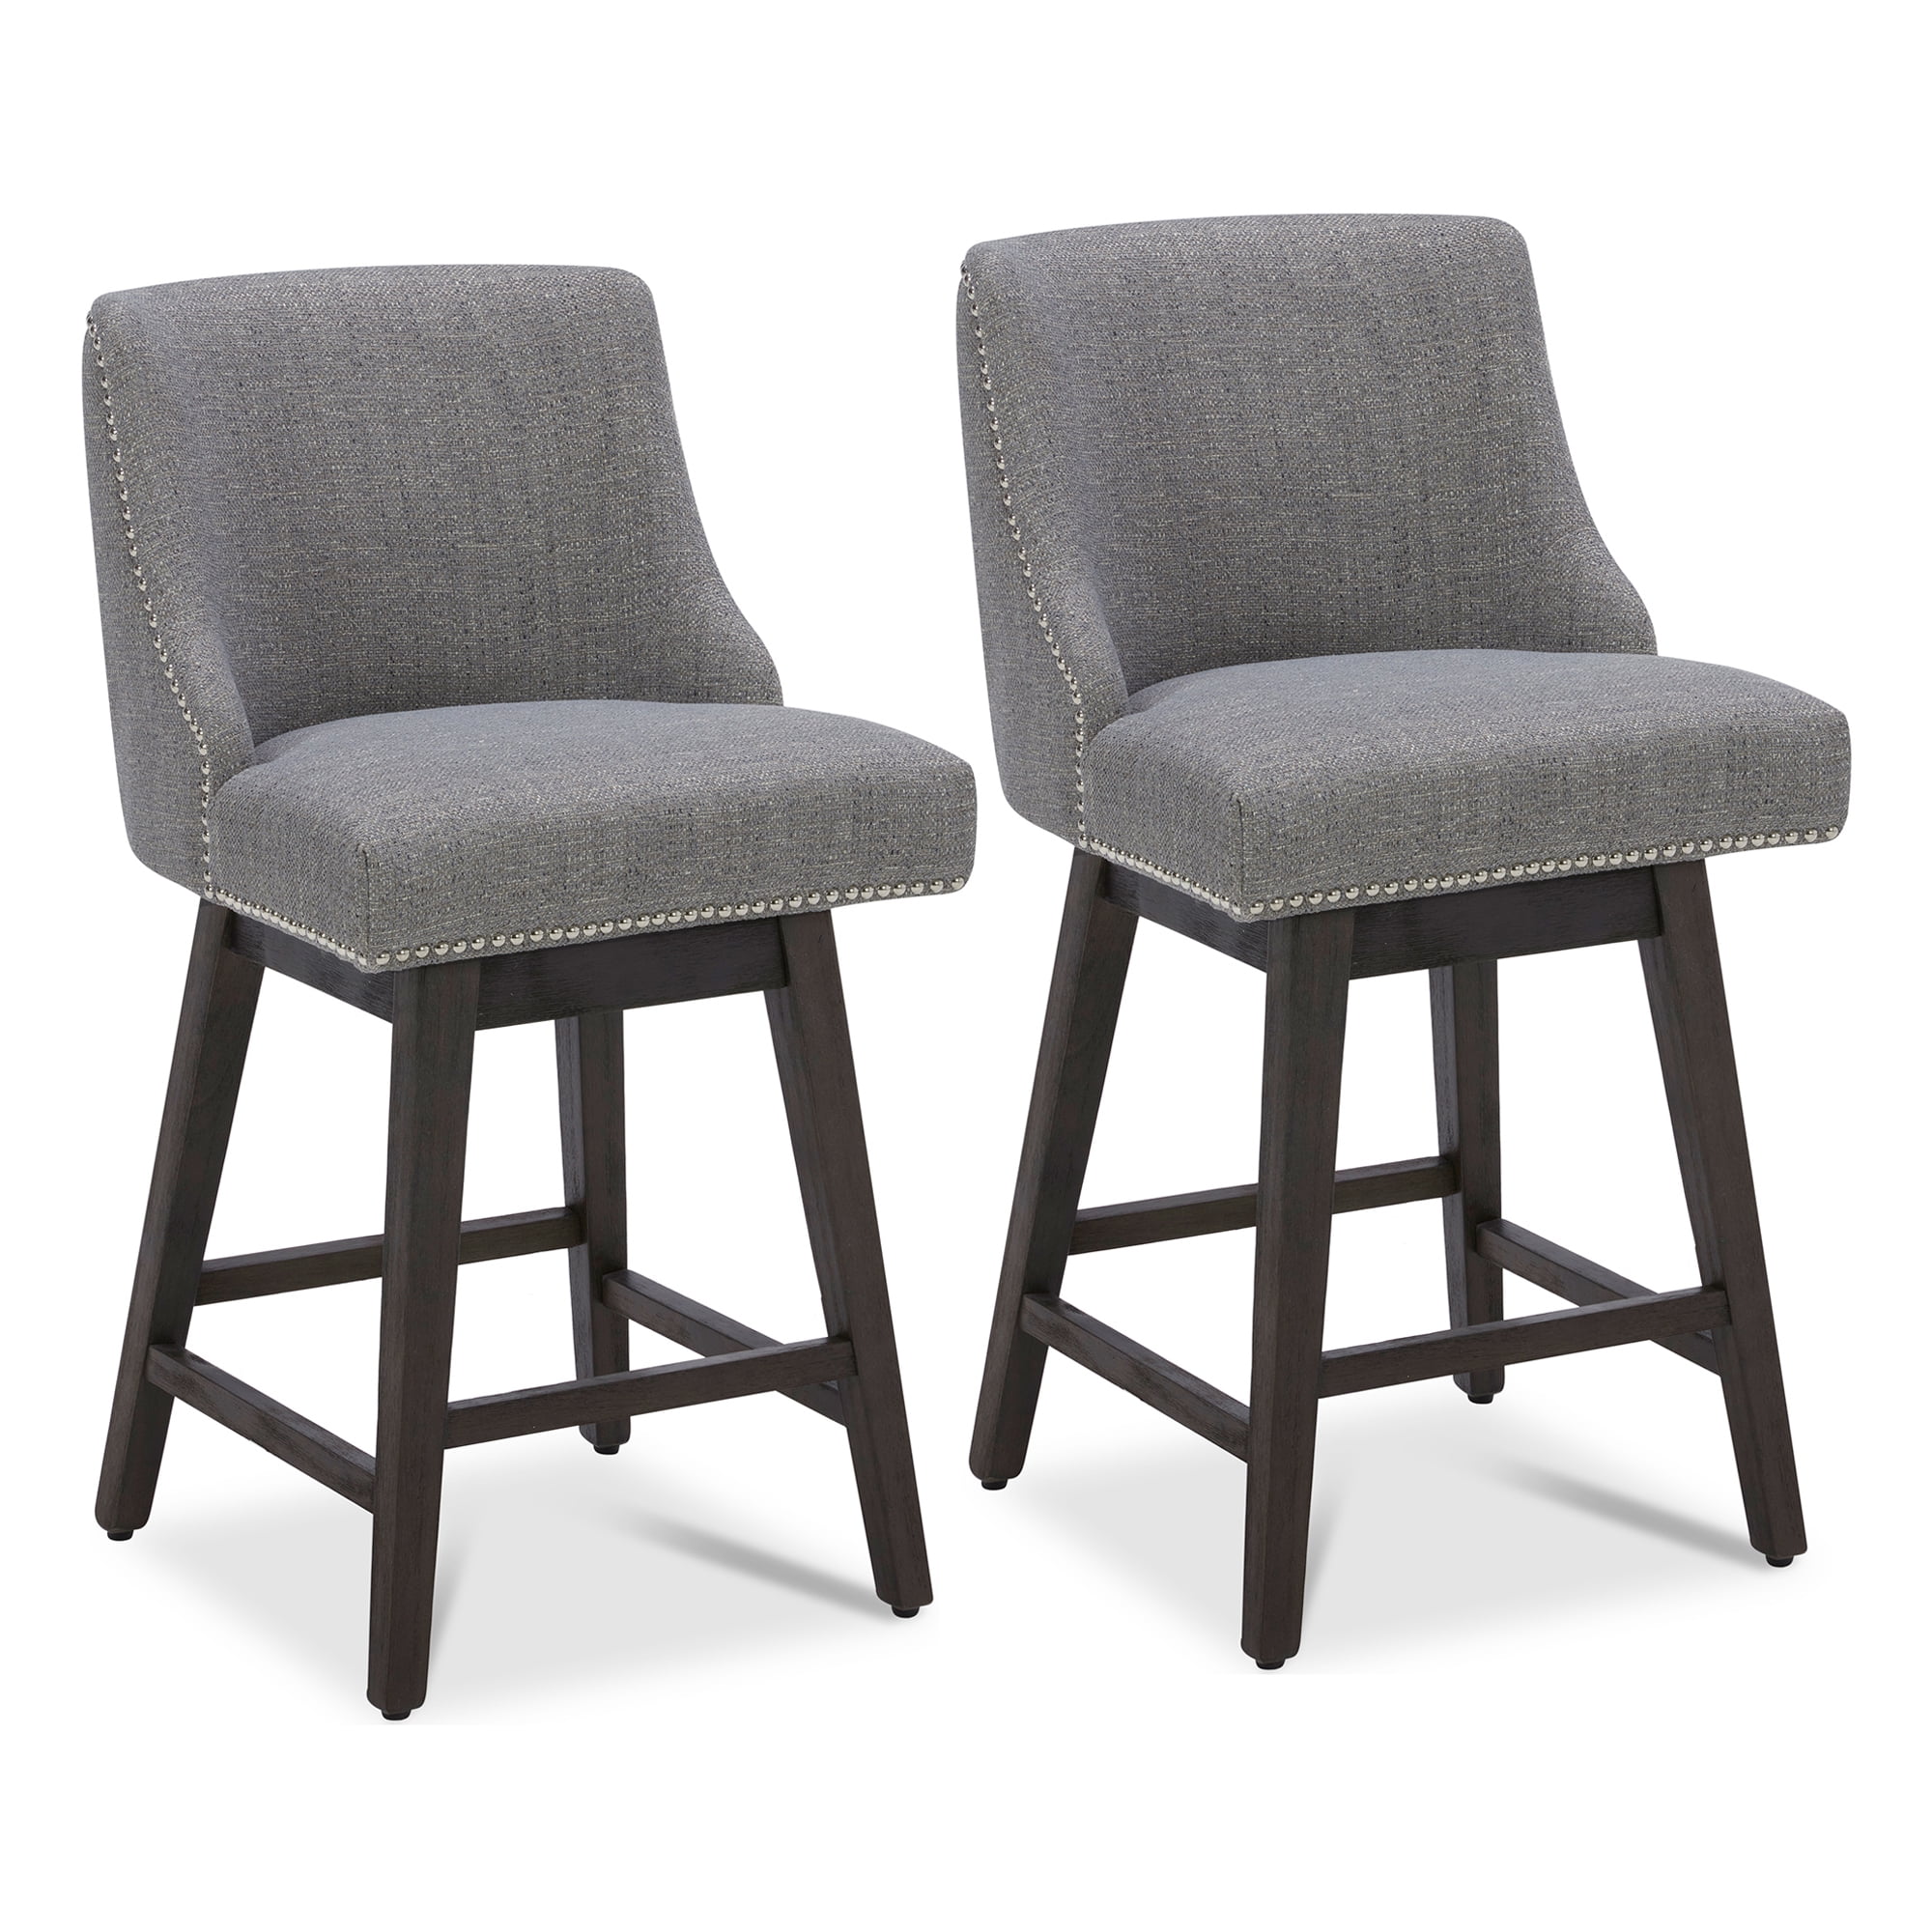 CHITA 26 inch Fabric Swivel Upholstered Counter Height Bar Stools with ...